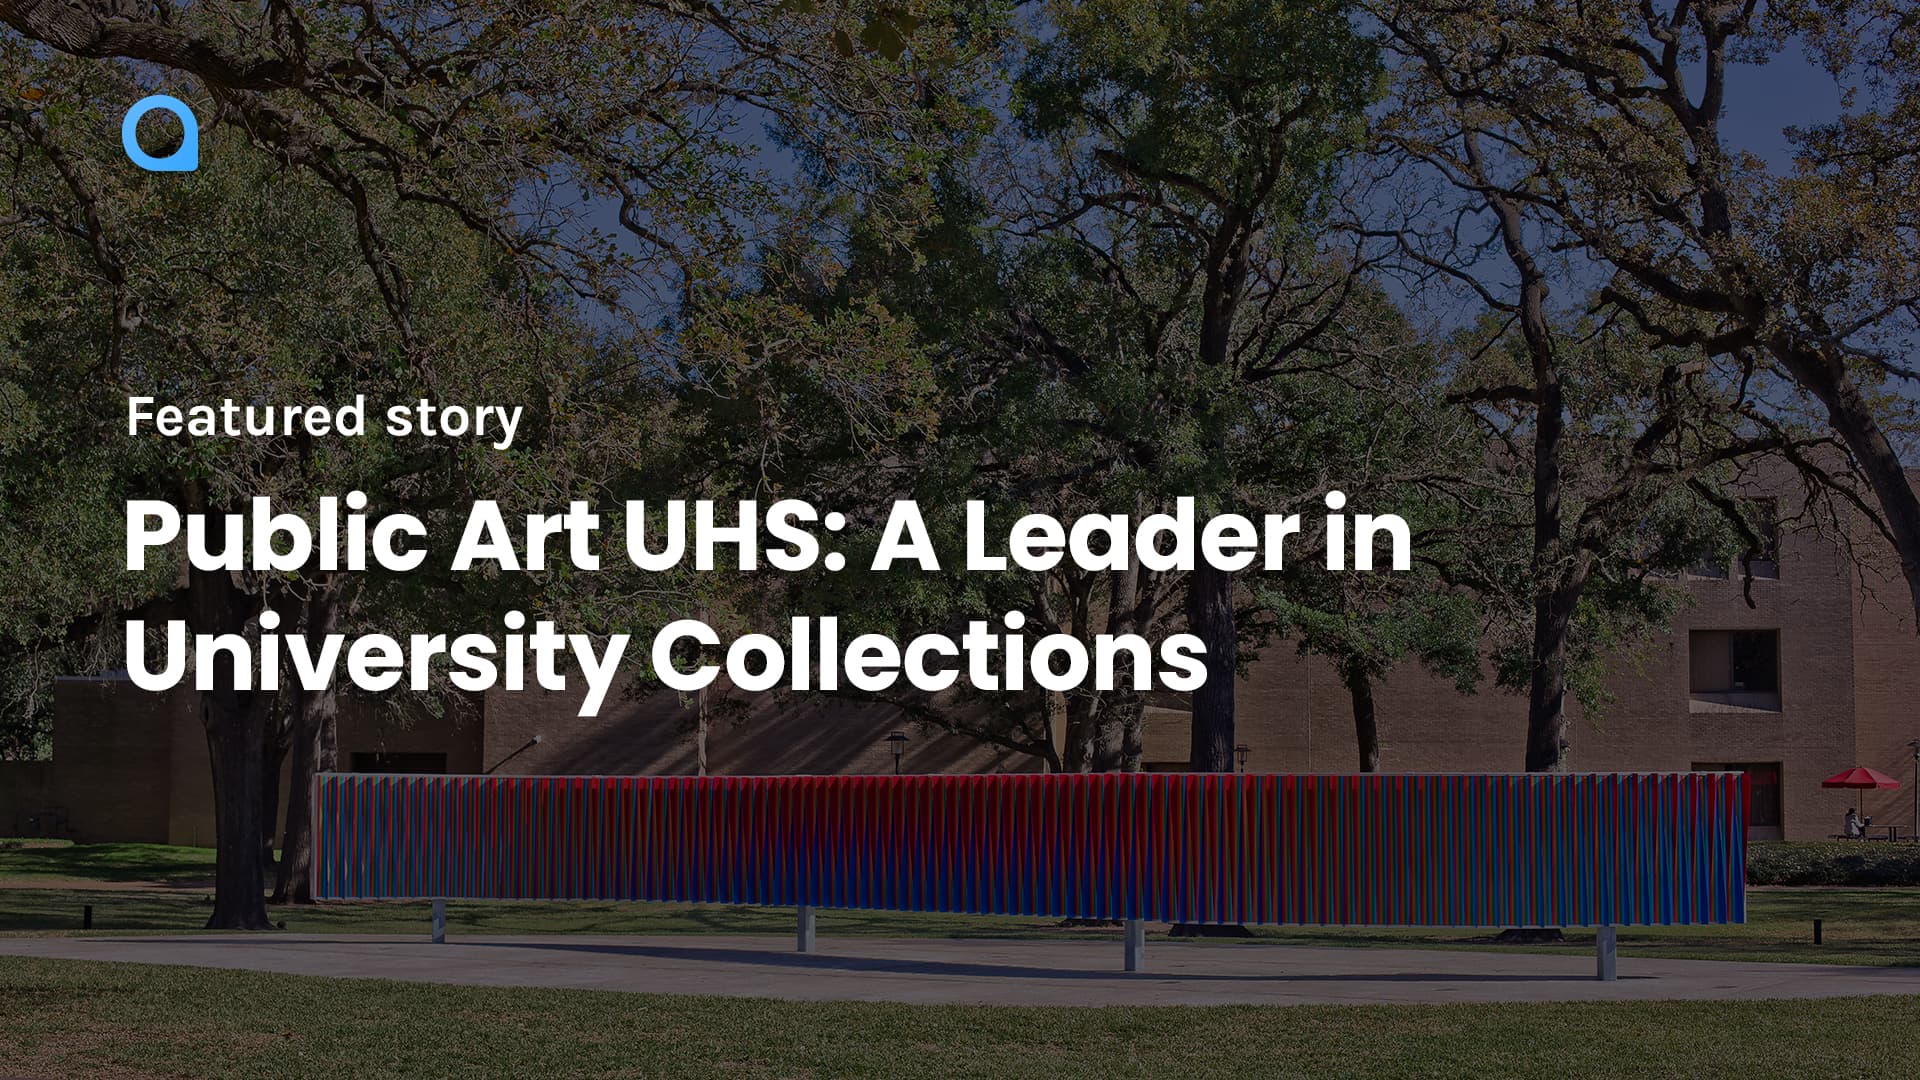 Public Art UHS: A Leader in University Collections